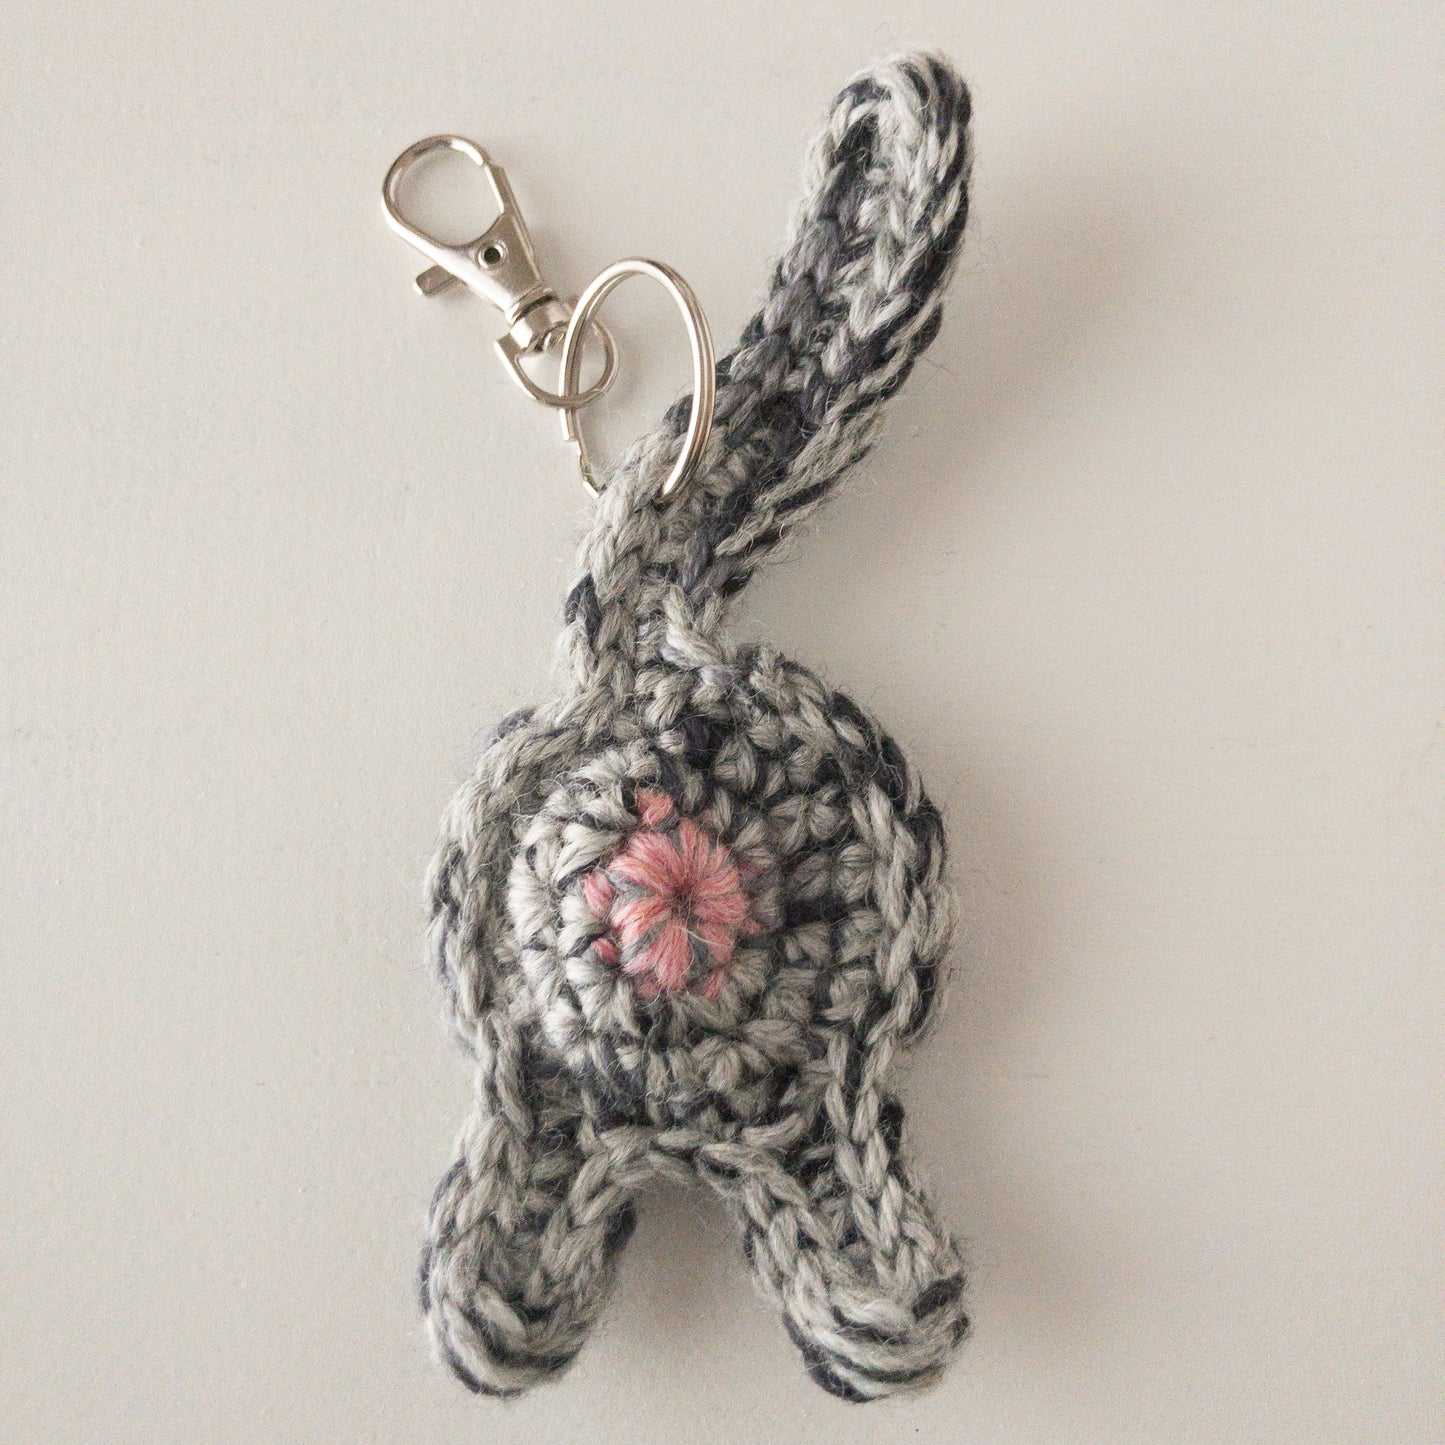 Cat Butt Keychain Valentine's Day Gift with OOAK Art Card